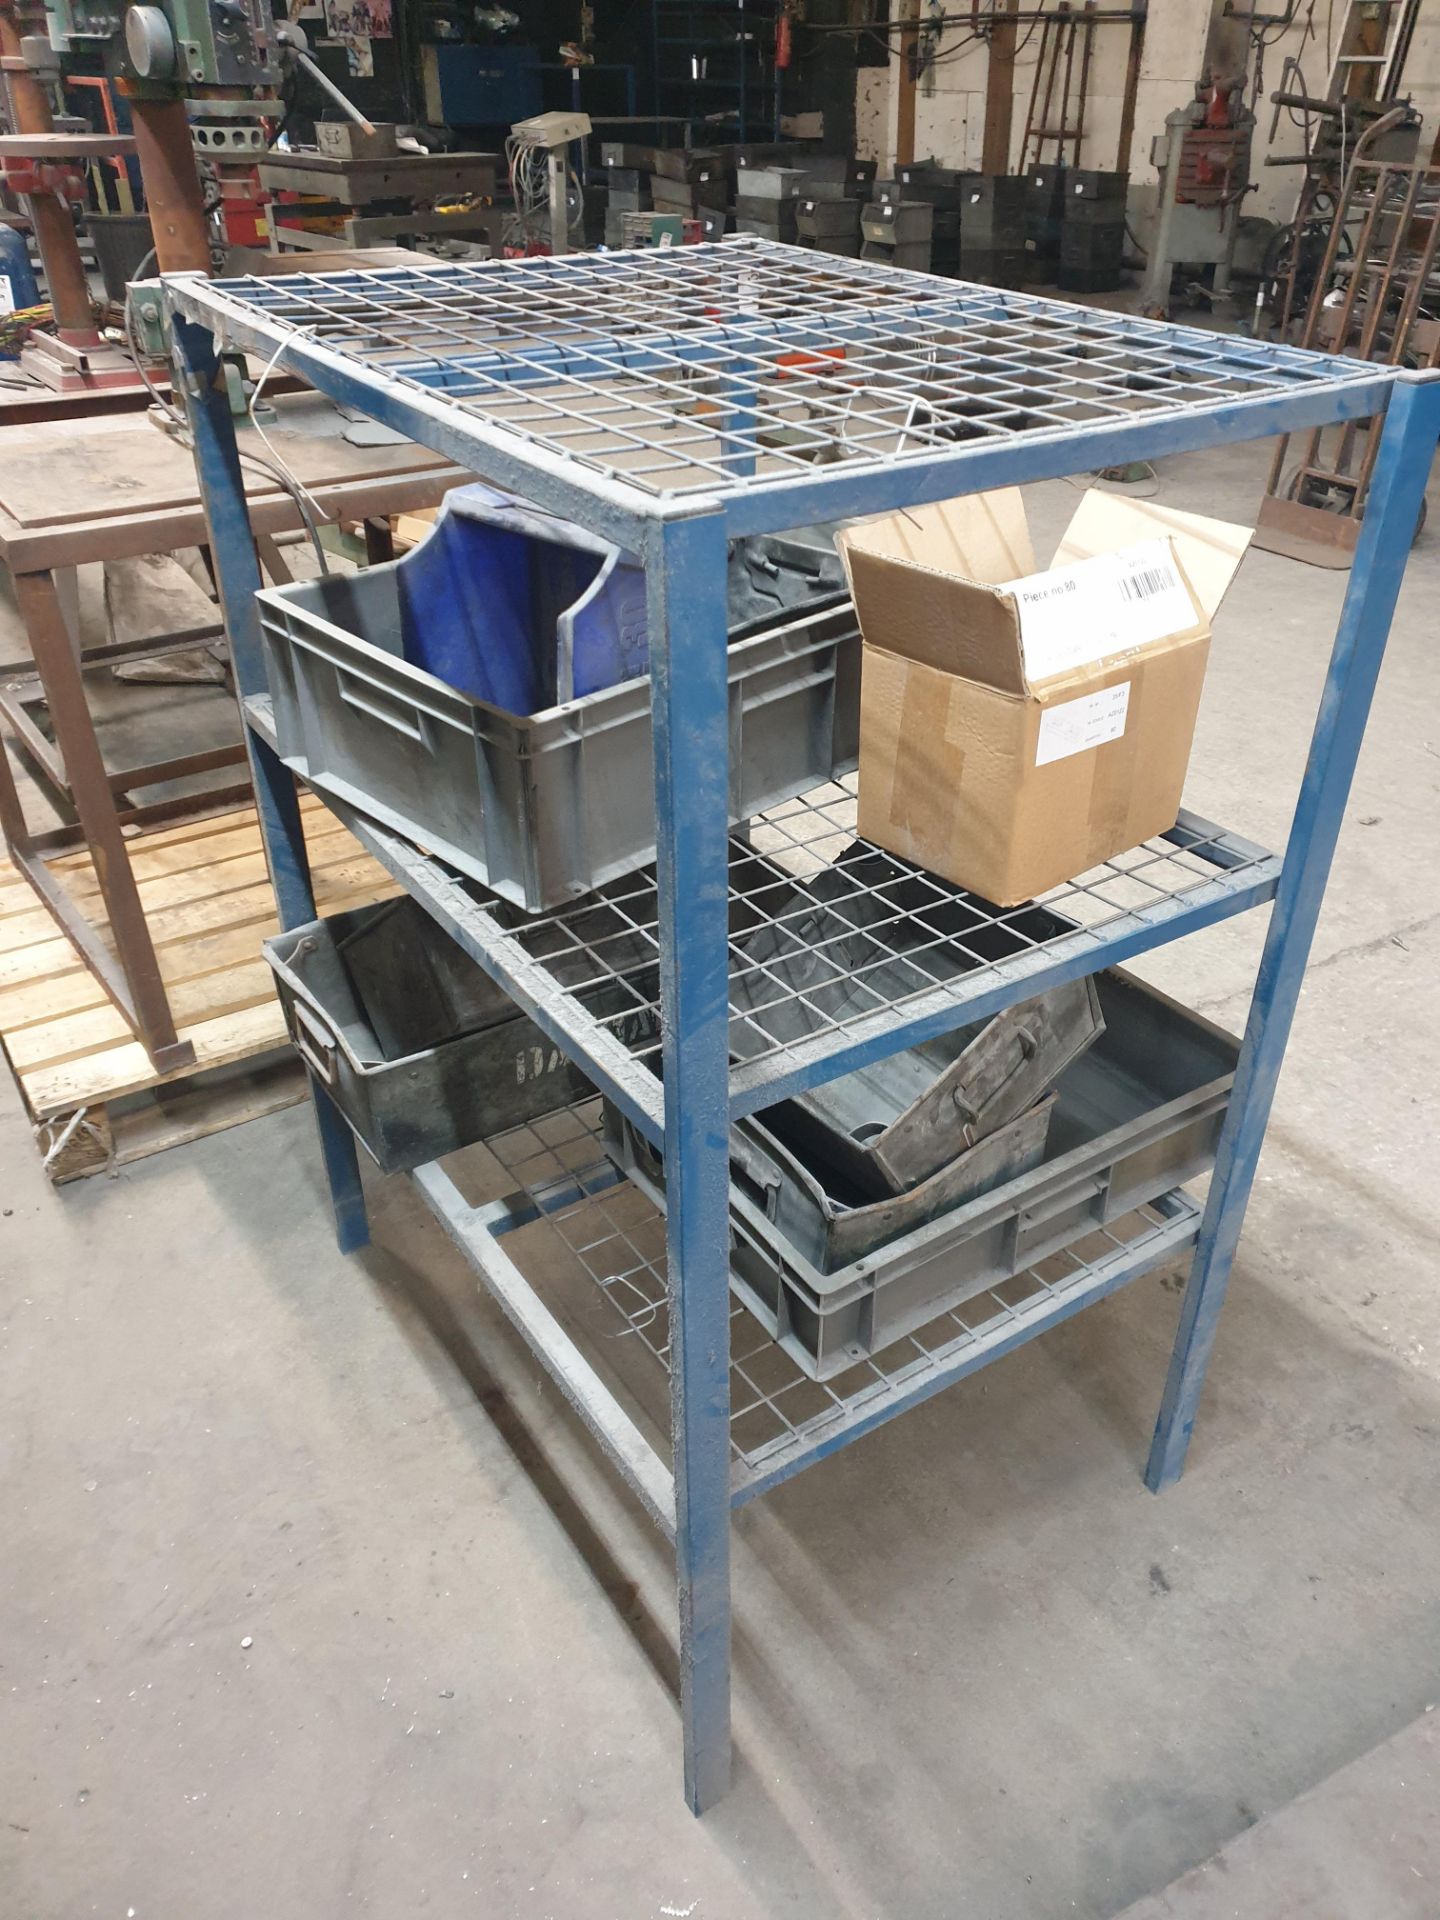 Steel shelves with contents - Image 2 of 2